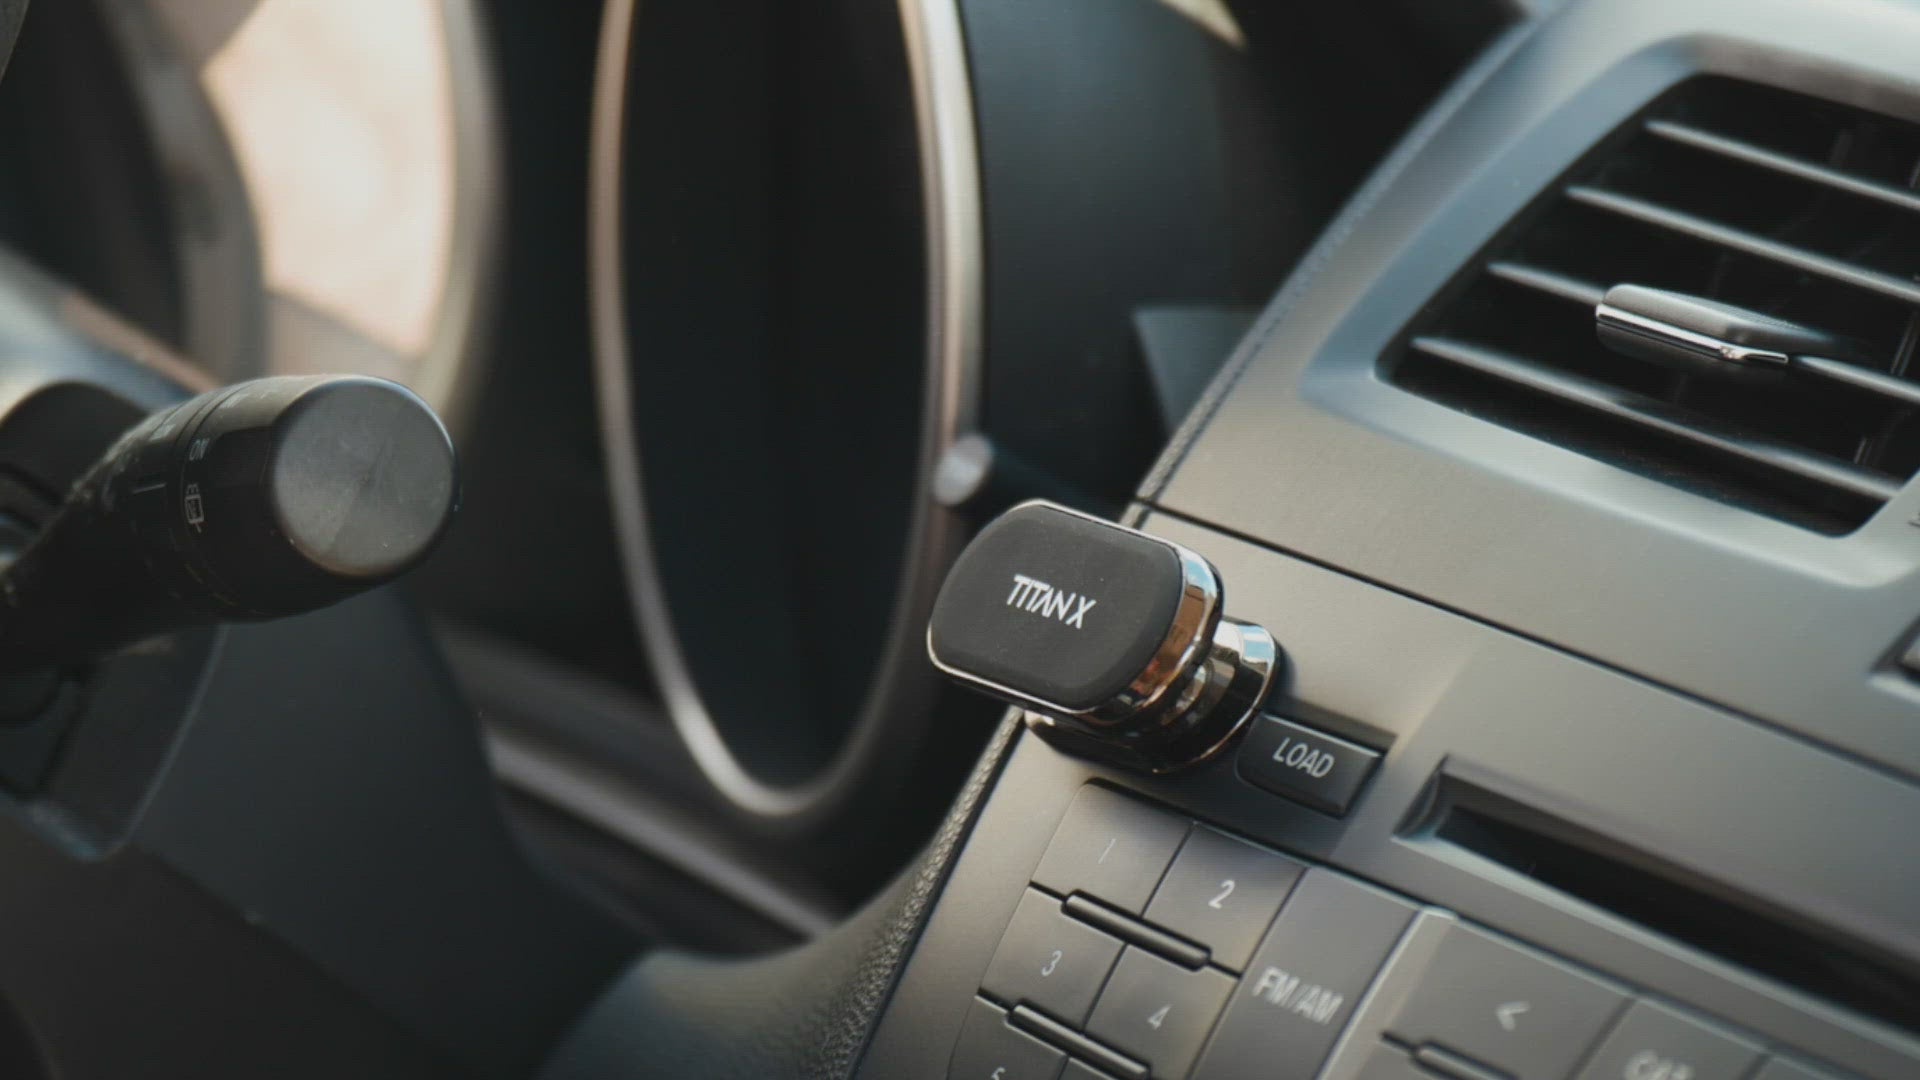 Magnetic Car Mount (Works with every phone and car model)